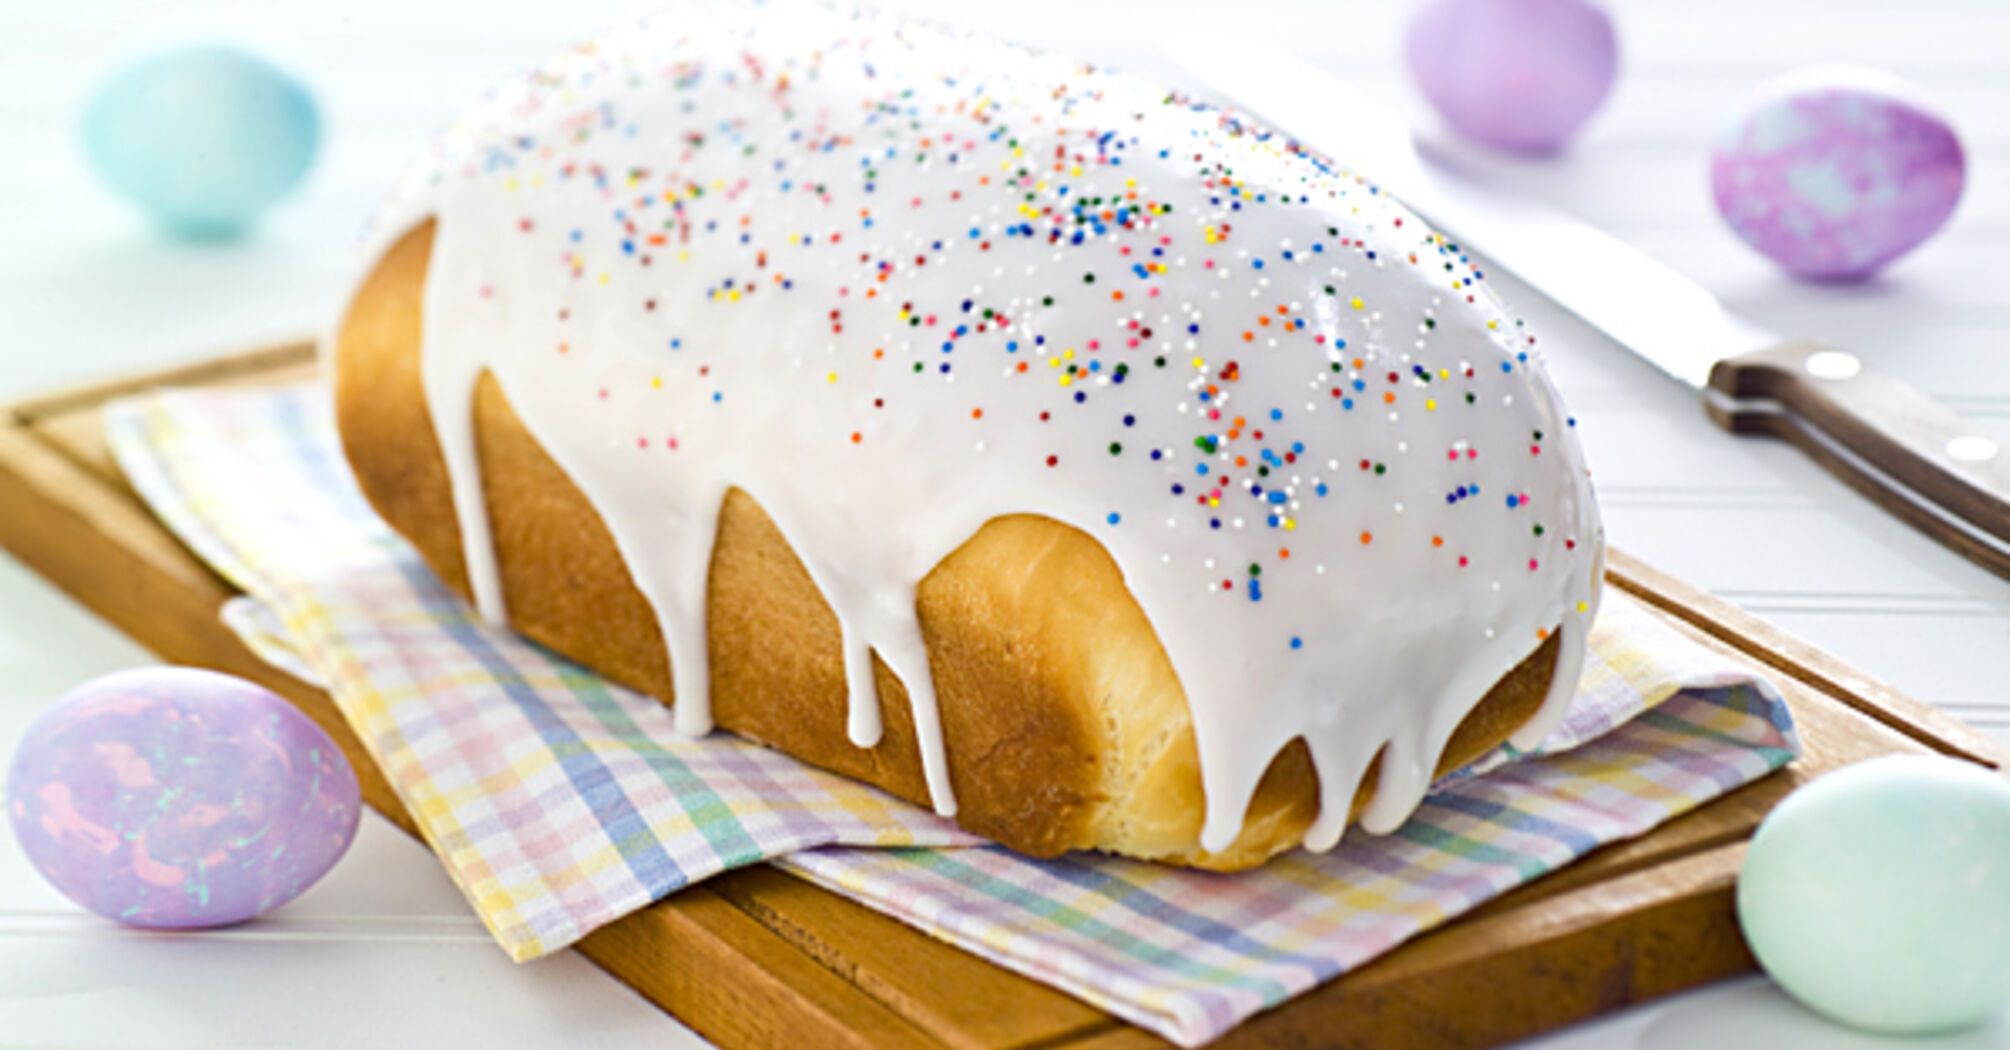 How to make the perfect icing for Easter bread